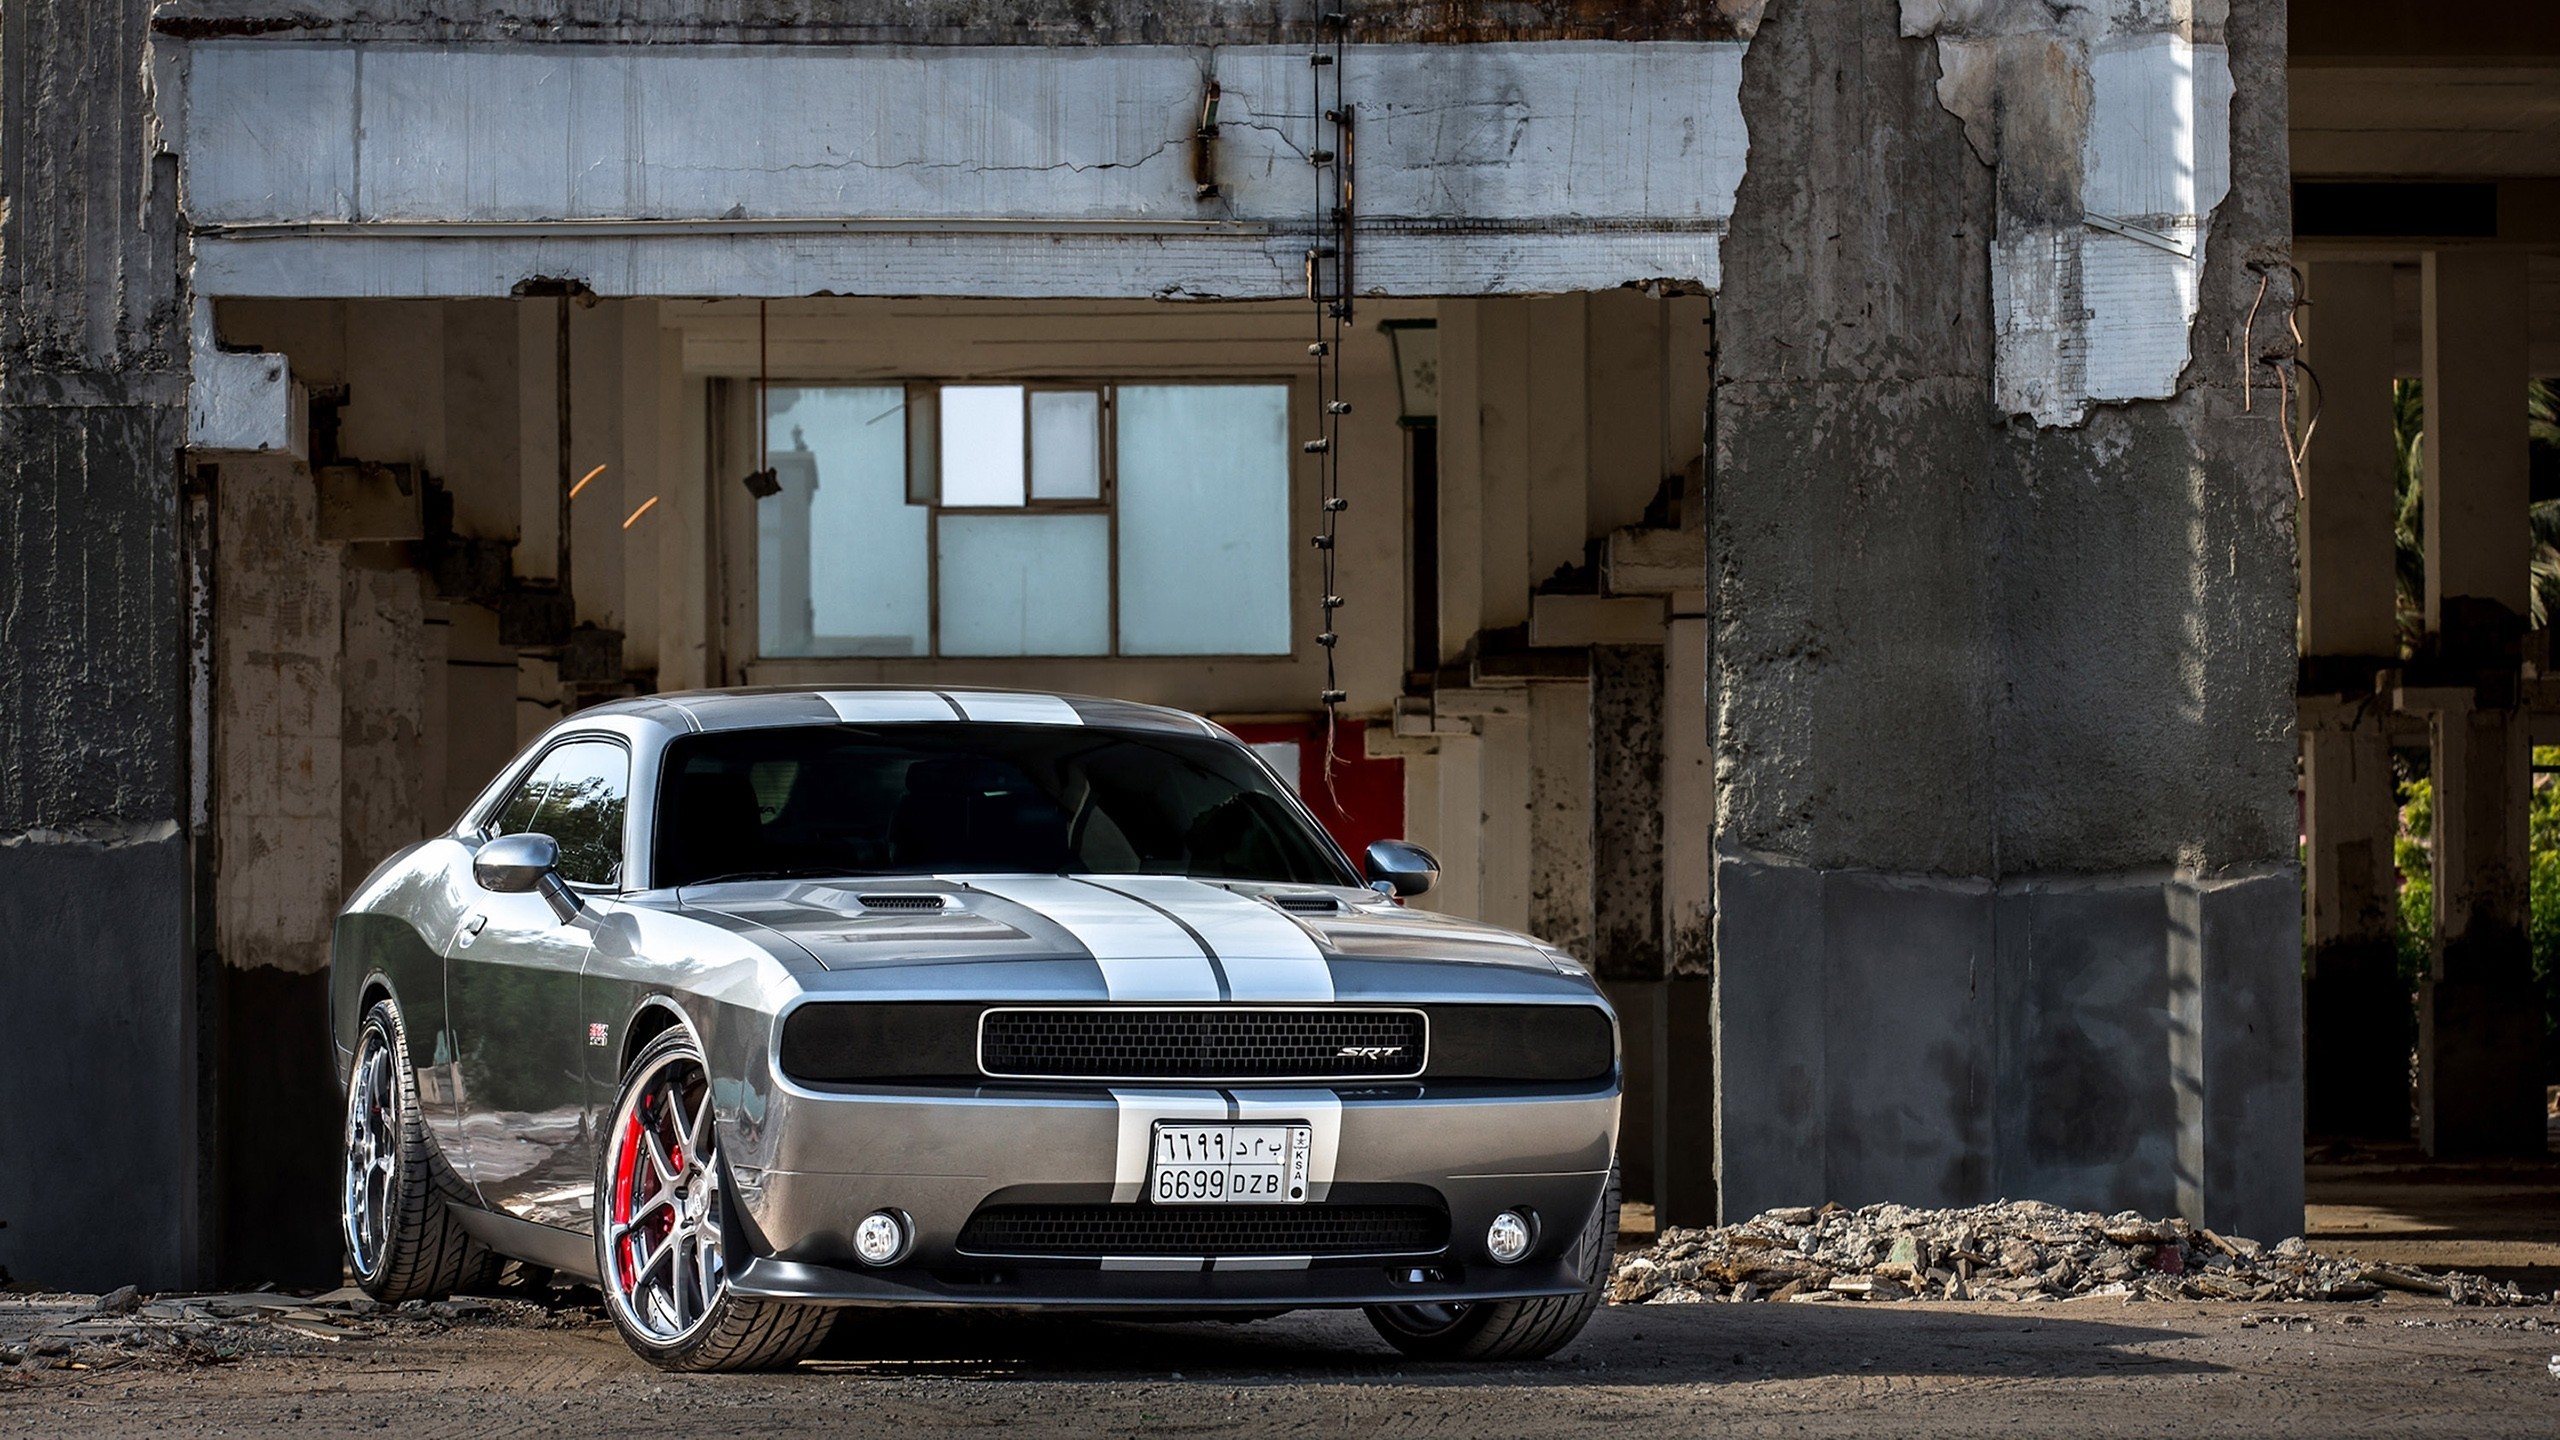 Free photo Picture for desktop with cool Dodge Challenger